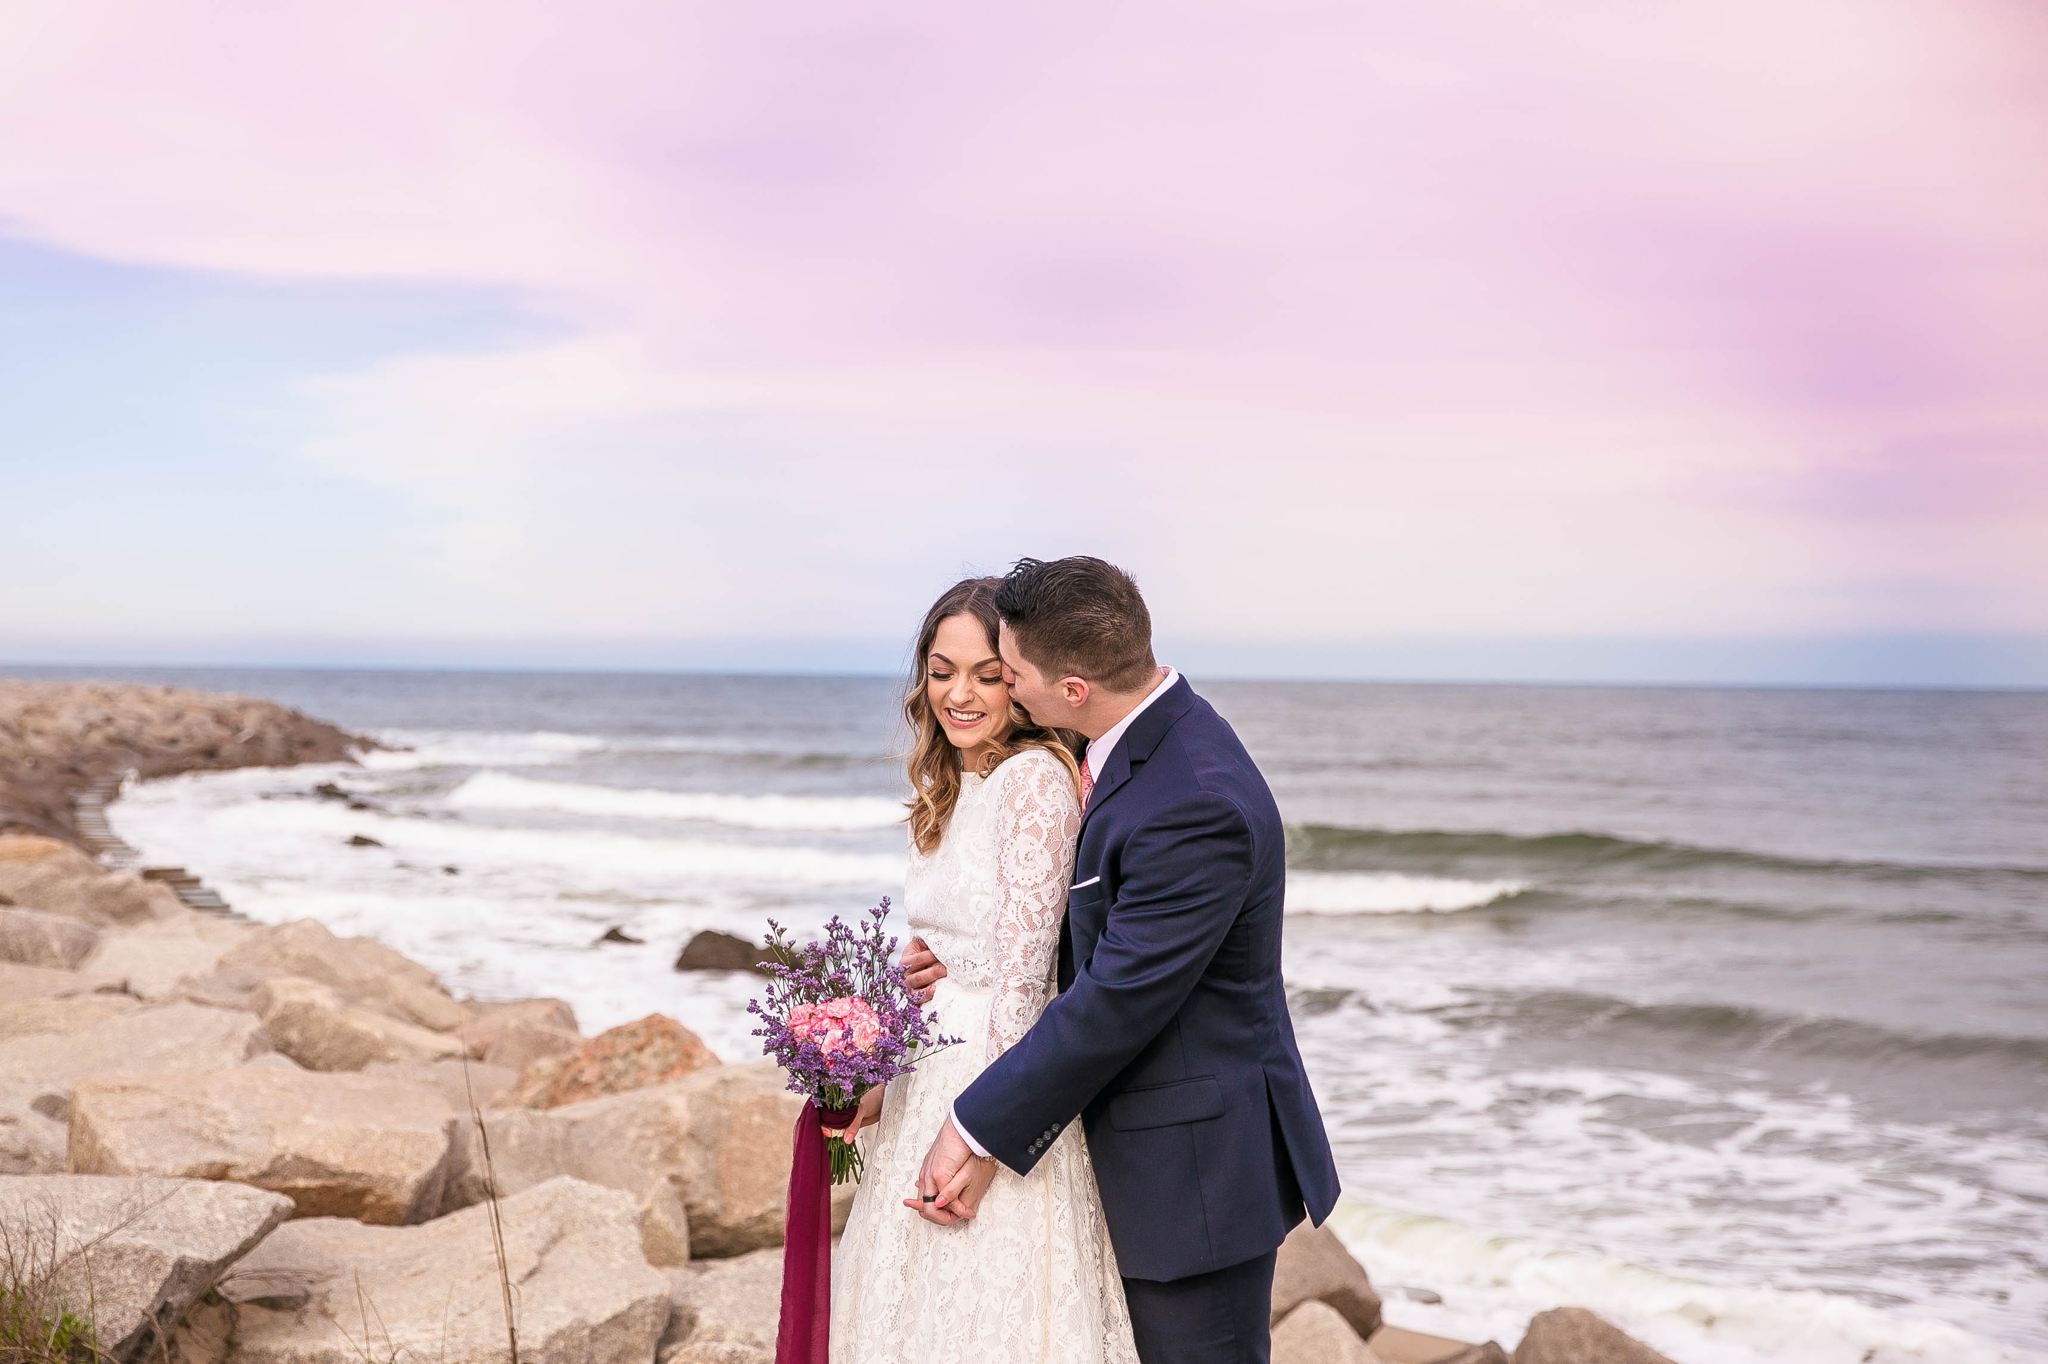 Cotton Candy Sky Beach Elopement Portraits - Bride and Groom sitting on top of rocks Cliffs - - dress by asos with purple and pink flowers and navy suit - oahu hawaii wedding photographer